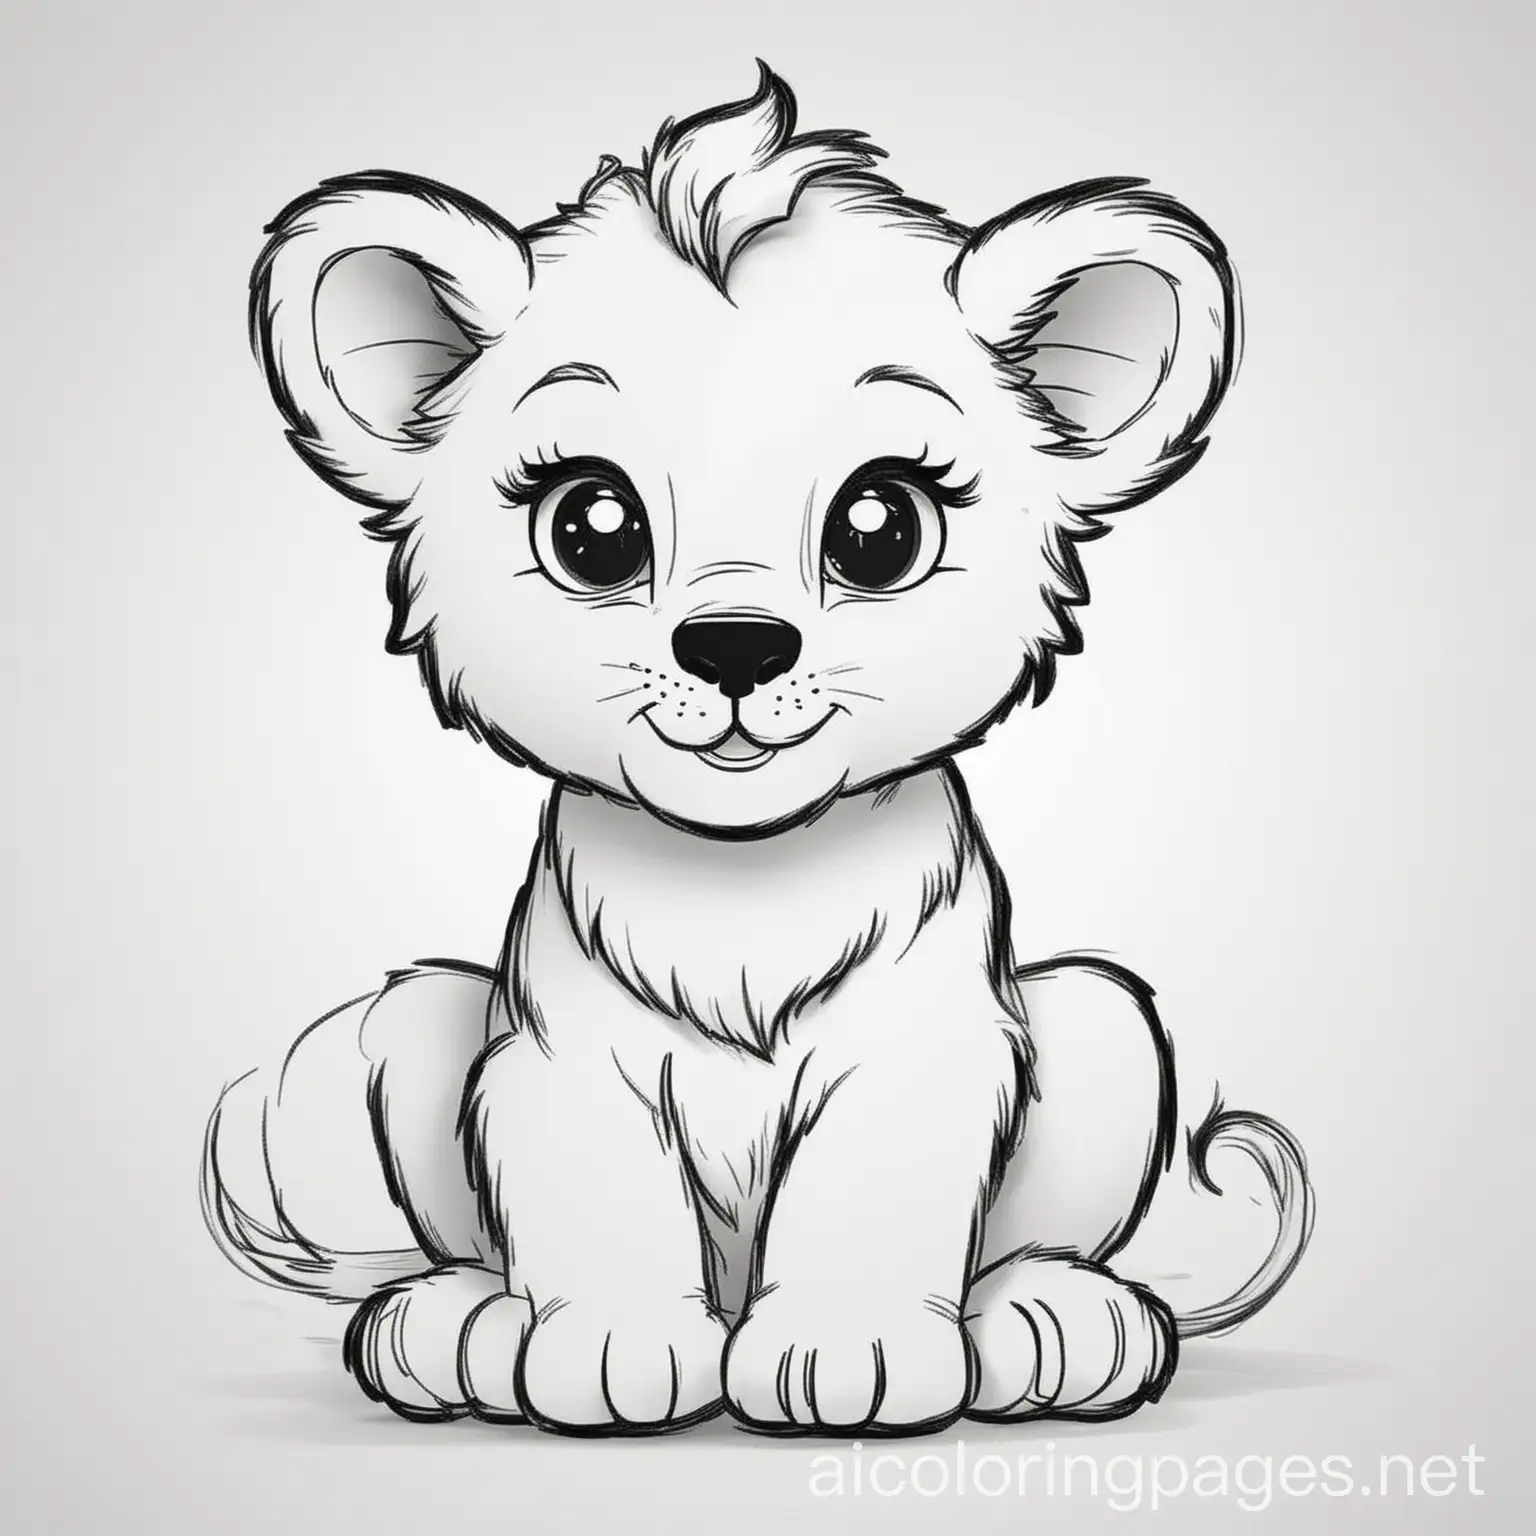 Smiling-Lion-Cub-Coloring-Page-Cute-Black-and-White-Line-Art-for-Kids